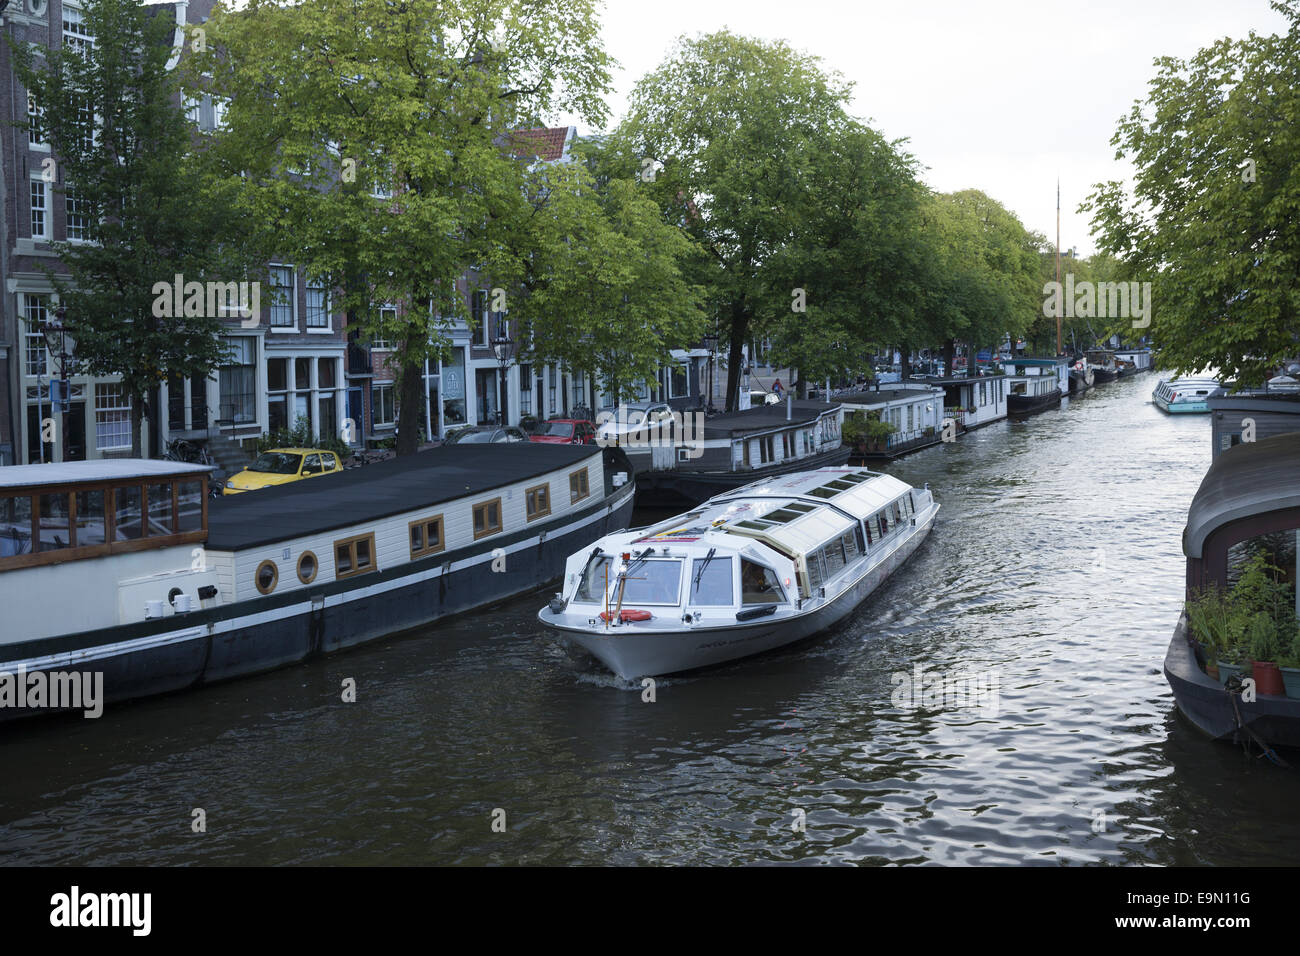 People literally live on the canals in Houseboats in Amsterdam, The Netherlands. Stock Photo